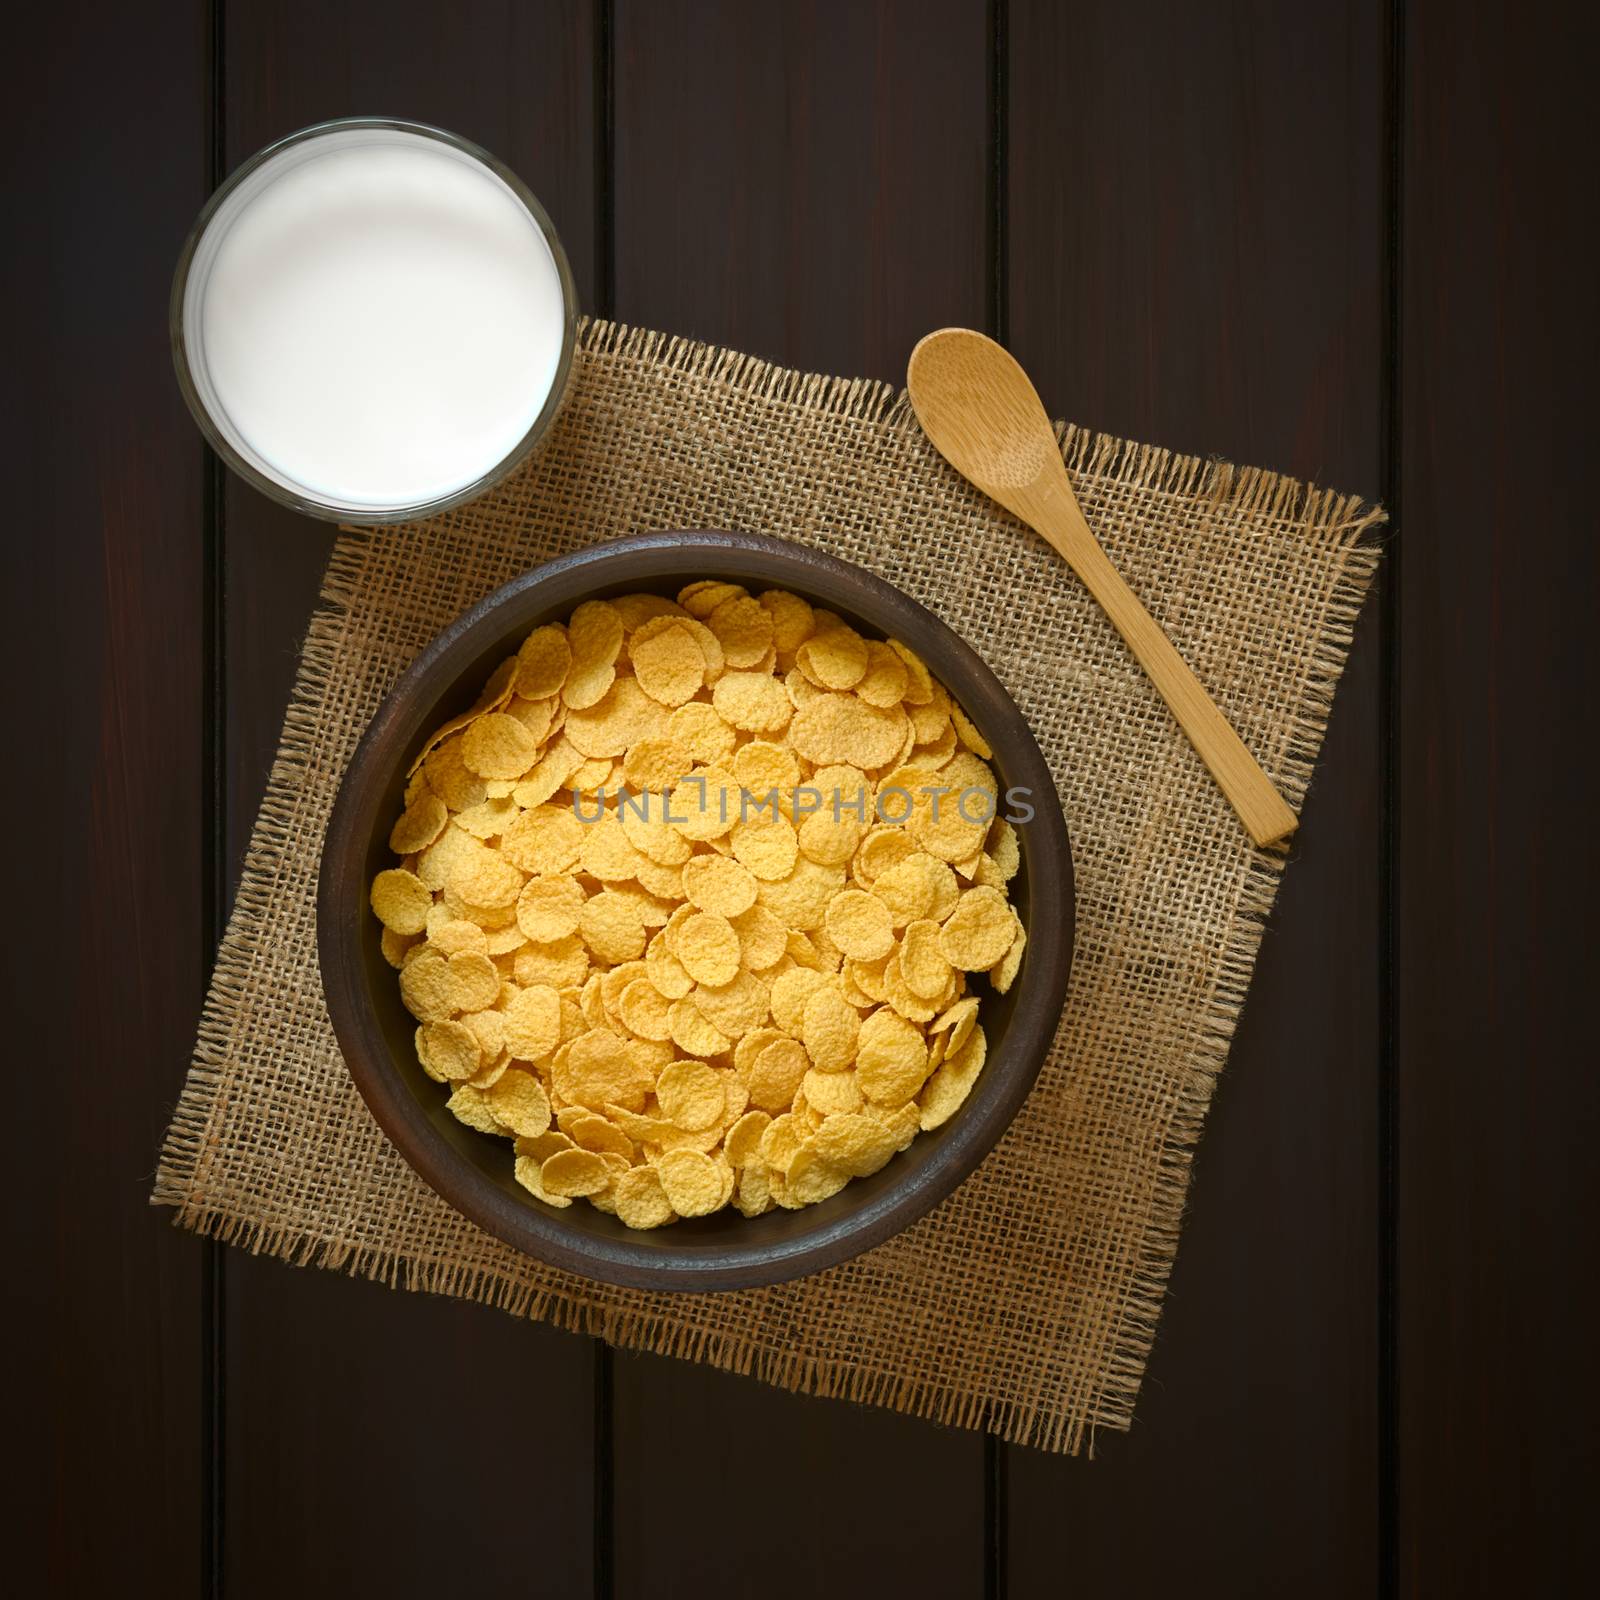 Crispy corn flakes breakfast cereal in rustic bowl with a glass of milk and a wooden spoon on the side, photographed overhead on dark wood with natural light